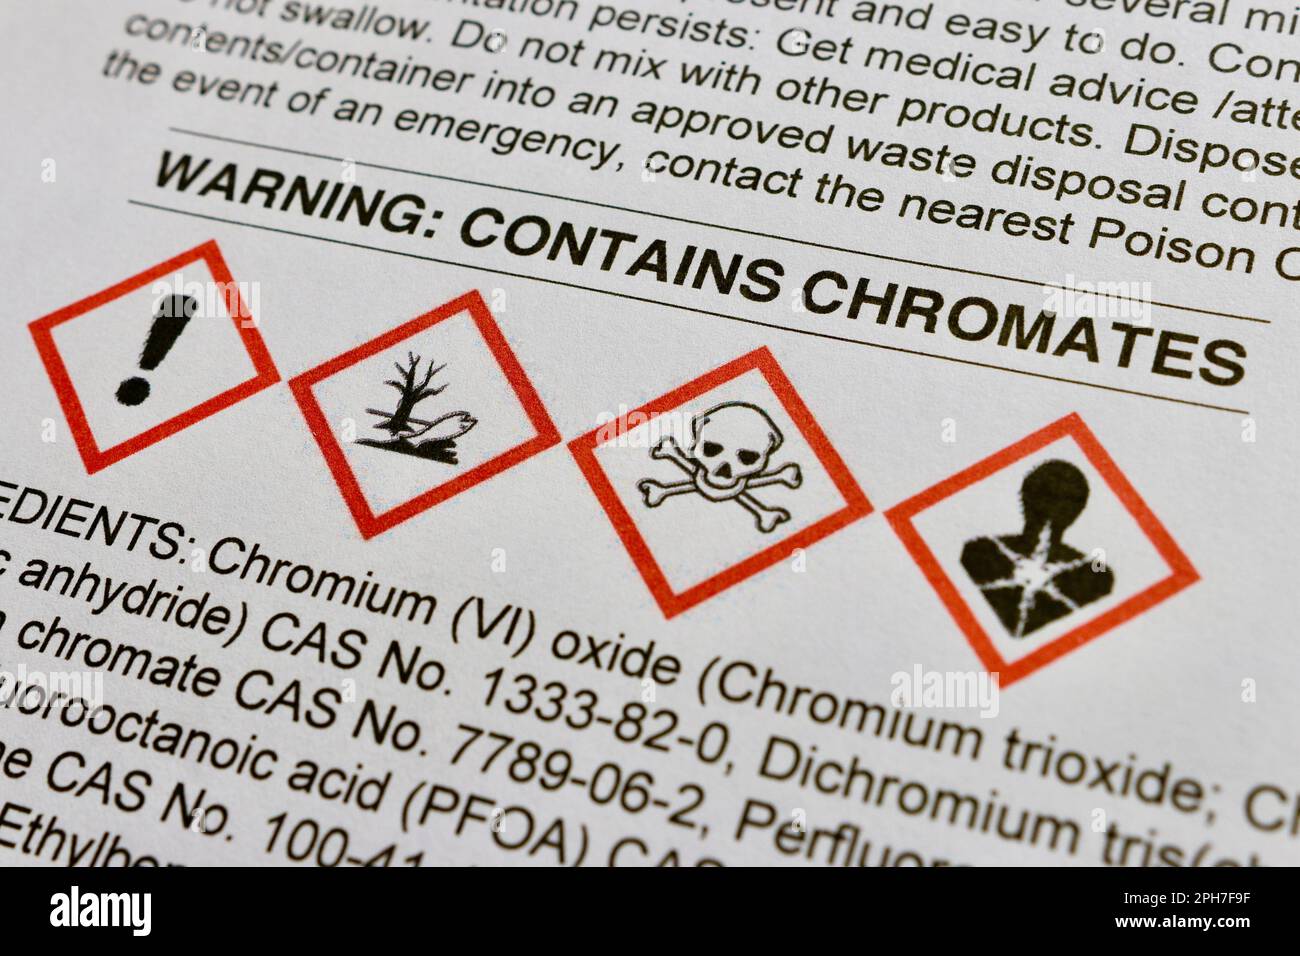 Warning on a Safety Data Sheet indicating that the product contains Chromate substances. Standard chemical hazard pictograms are shown Stock Photo